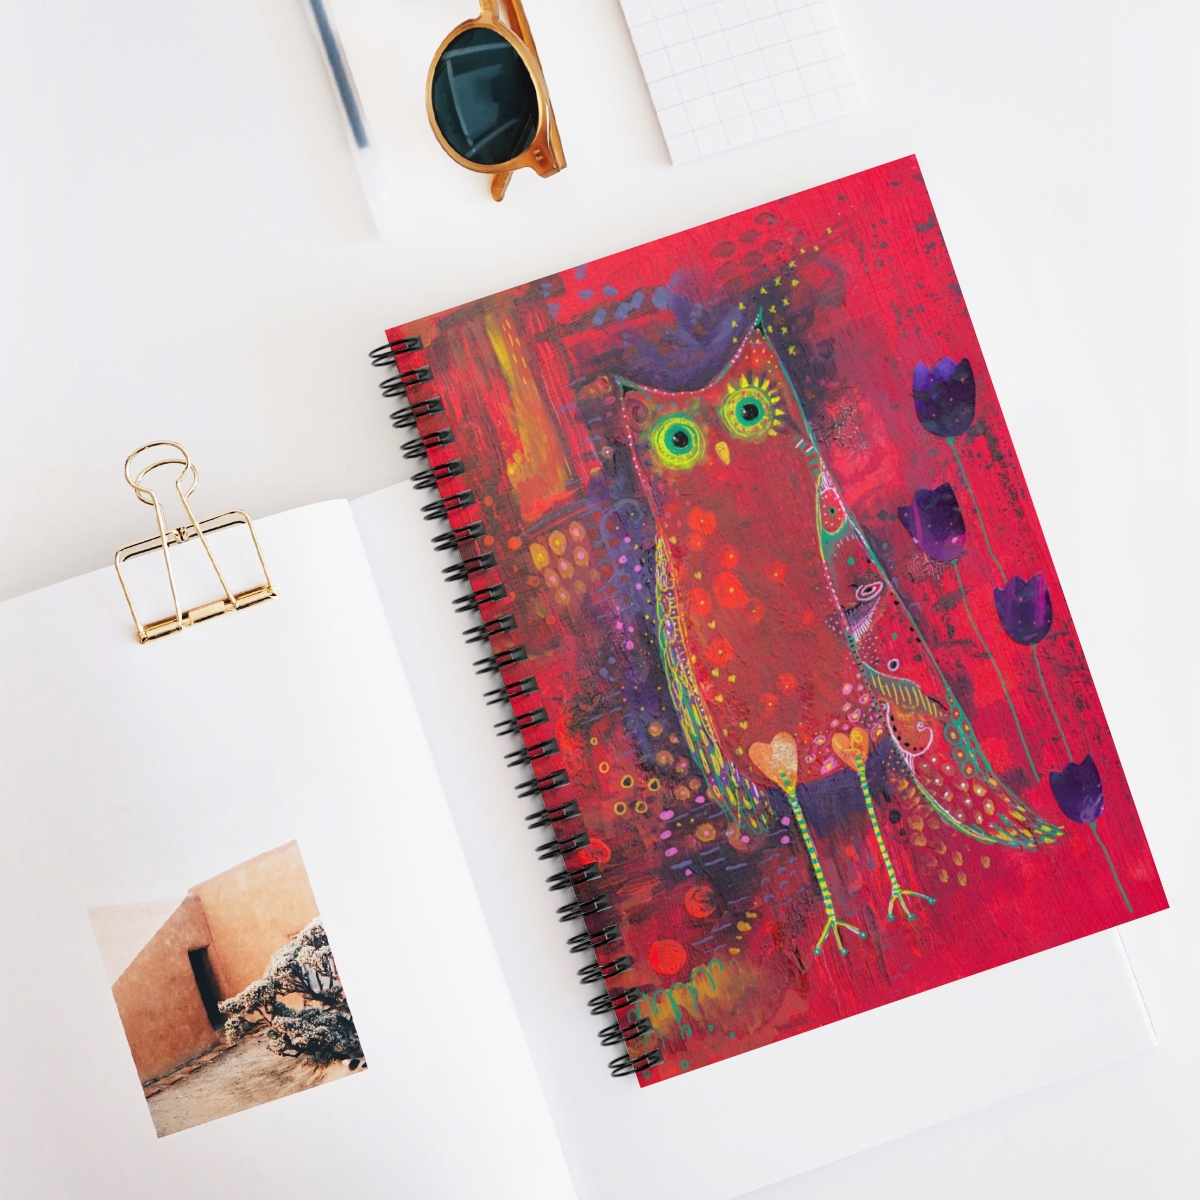 Owl journal in context- Ruby Owl is a whimsical owl painted in hues of red and purple with yellow and green pattern detail. Purple tulips grow beside her.